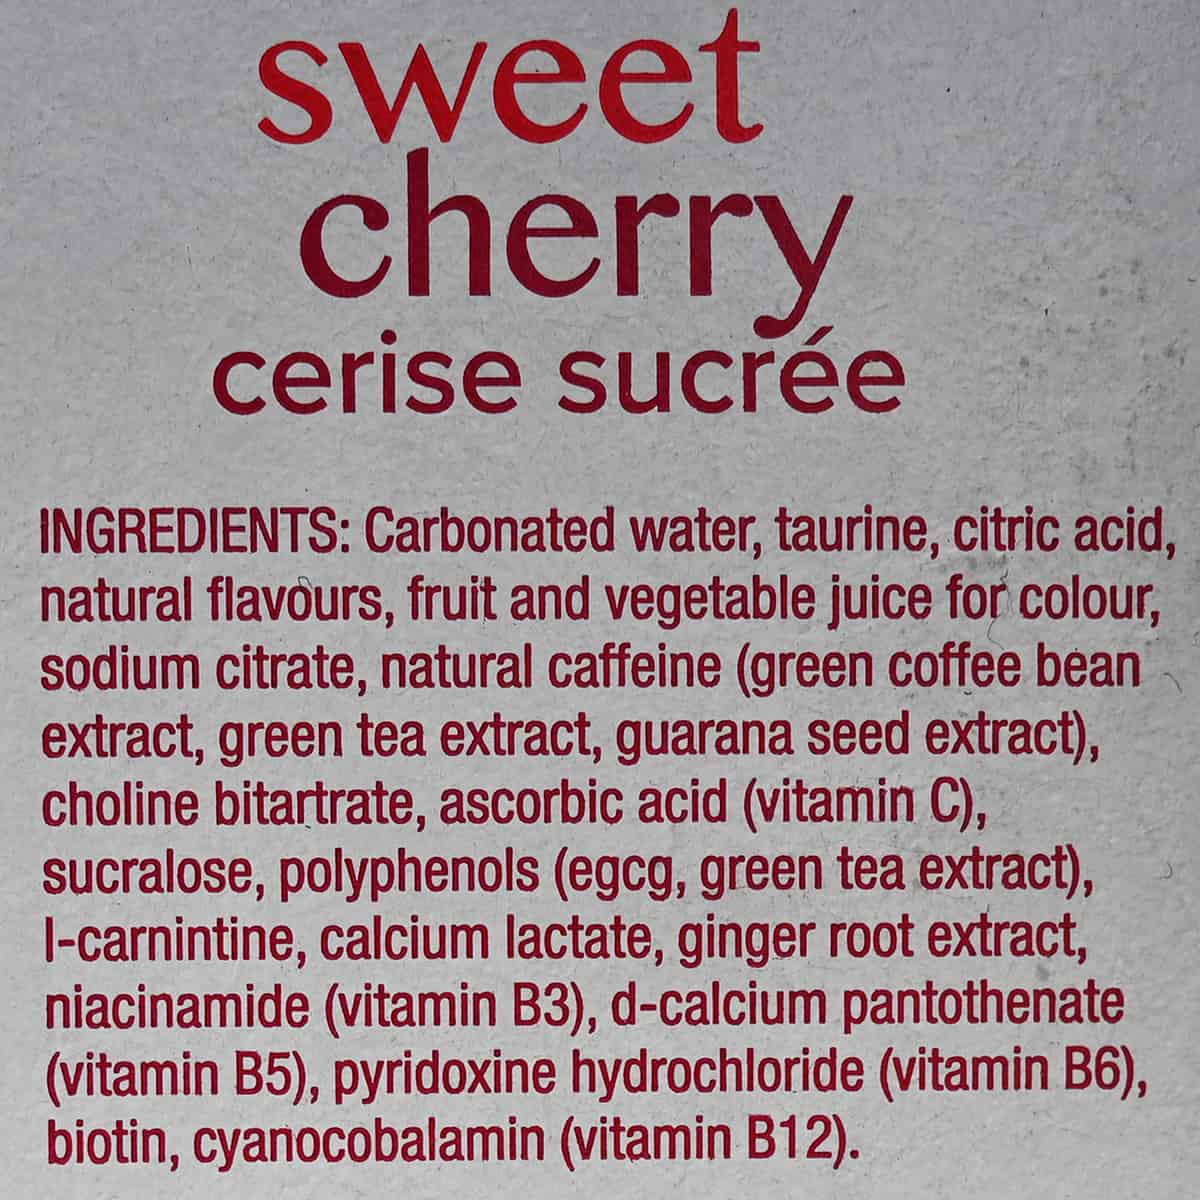 Image of the sweet cherry ingredients list from the box.